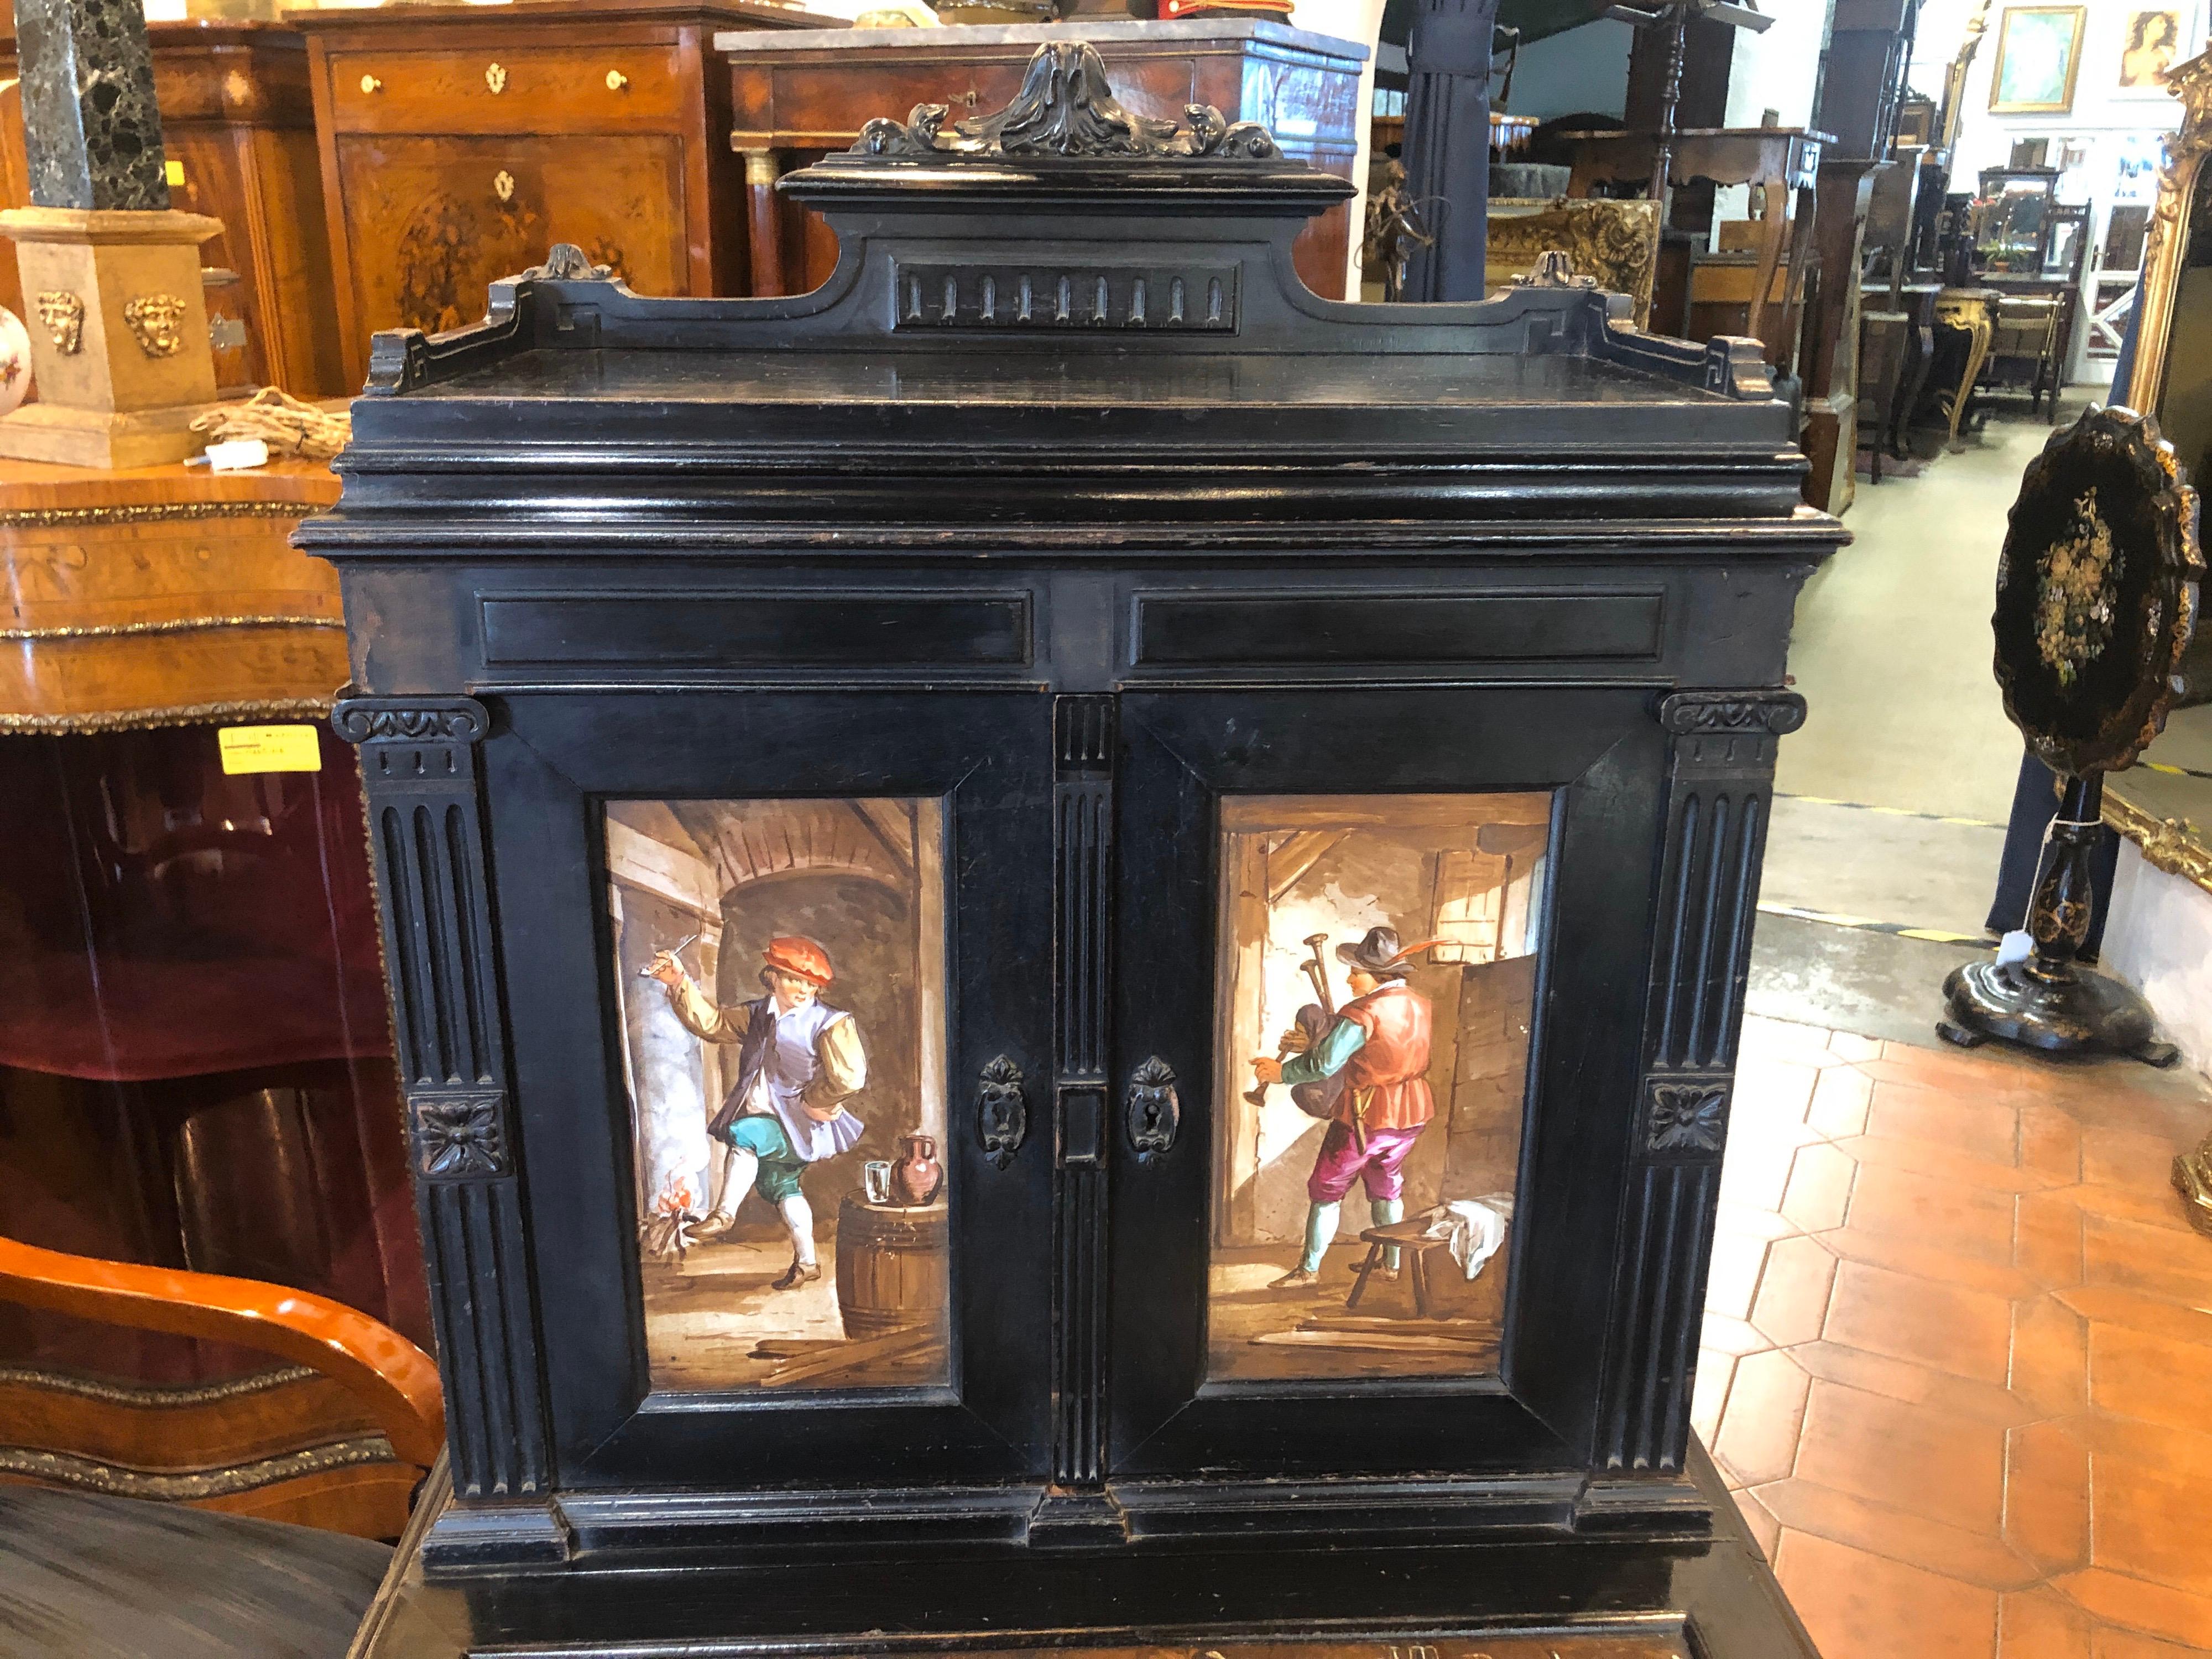 Ebonized furniture of Belgian origin, ceramic applications painted with scenes of everyday life in a Inn, Napoleon III era, circa 1850.
Finely ornamented with floral motifs, tip-up top where the leather or cloth can be put back, a drawer and two